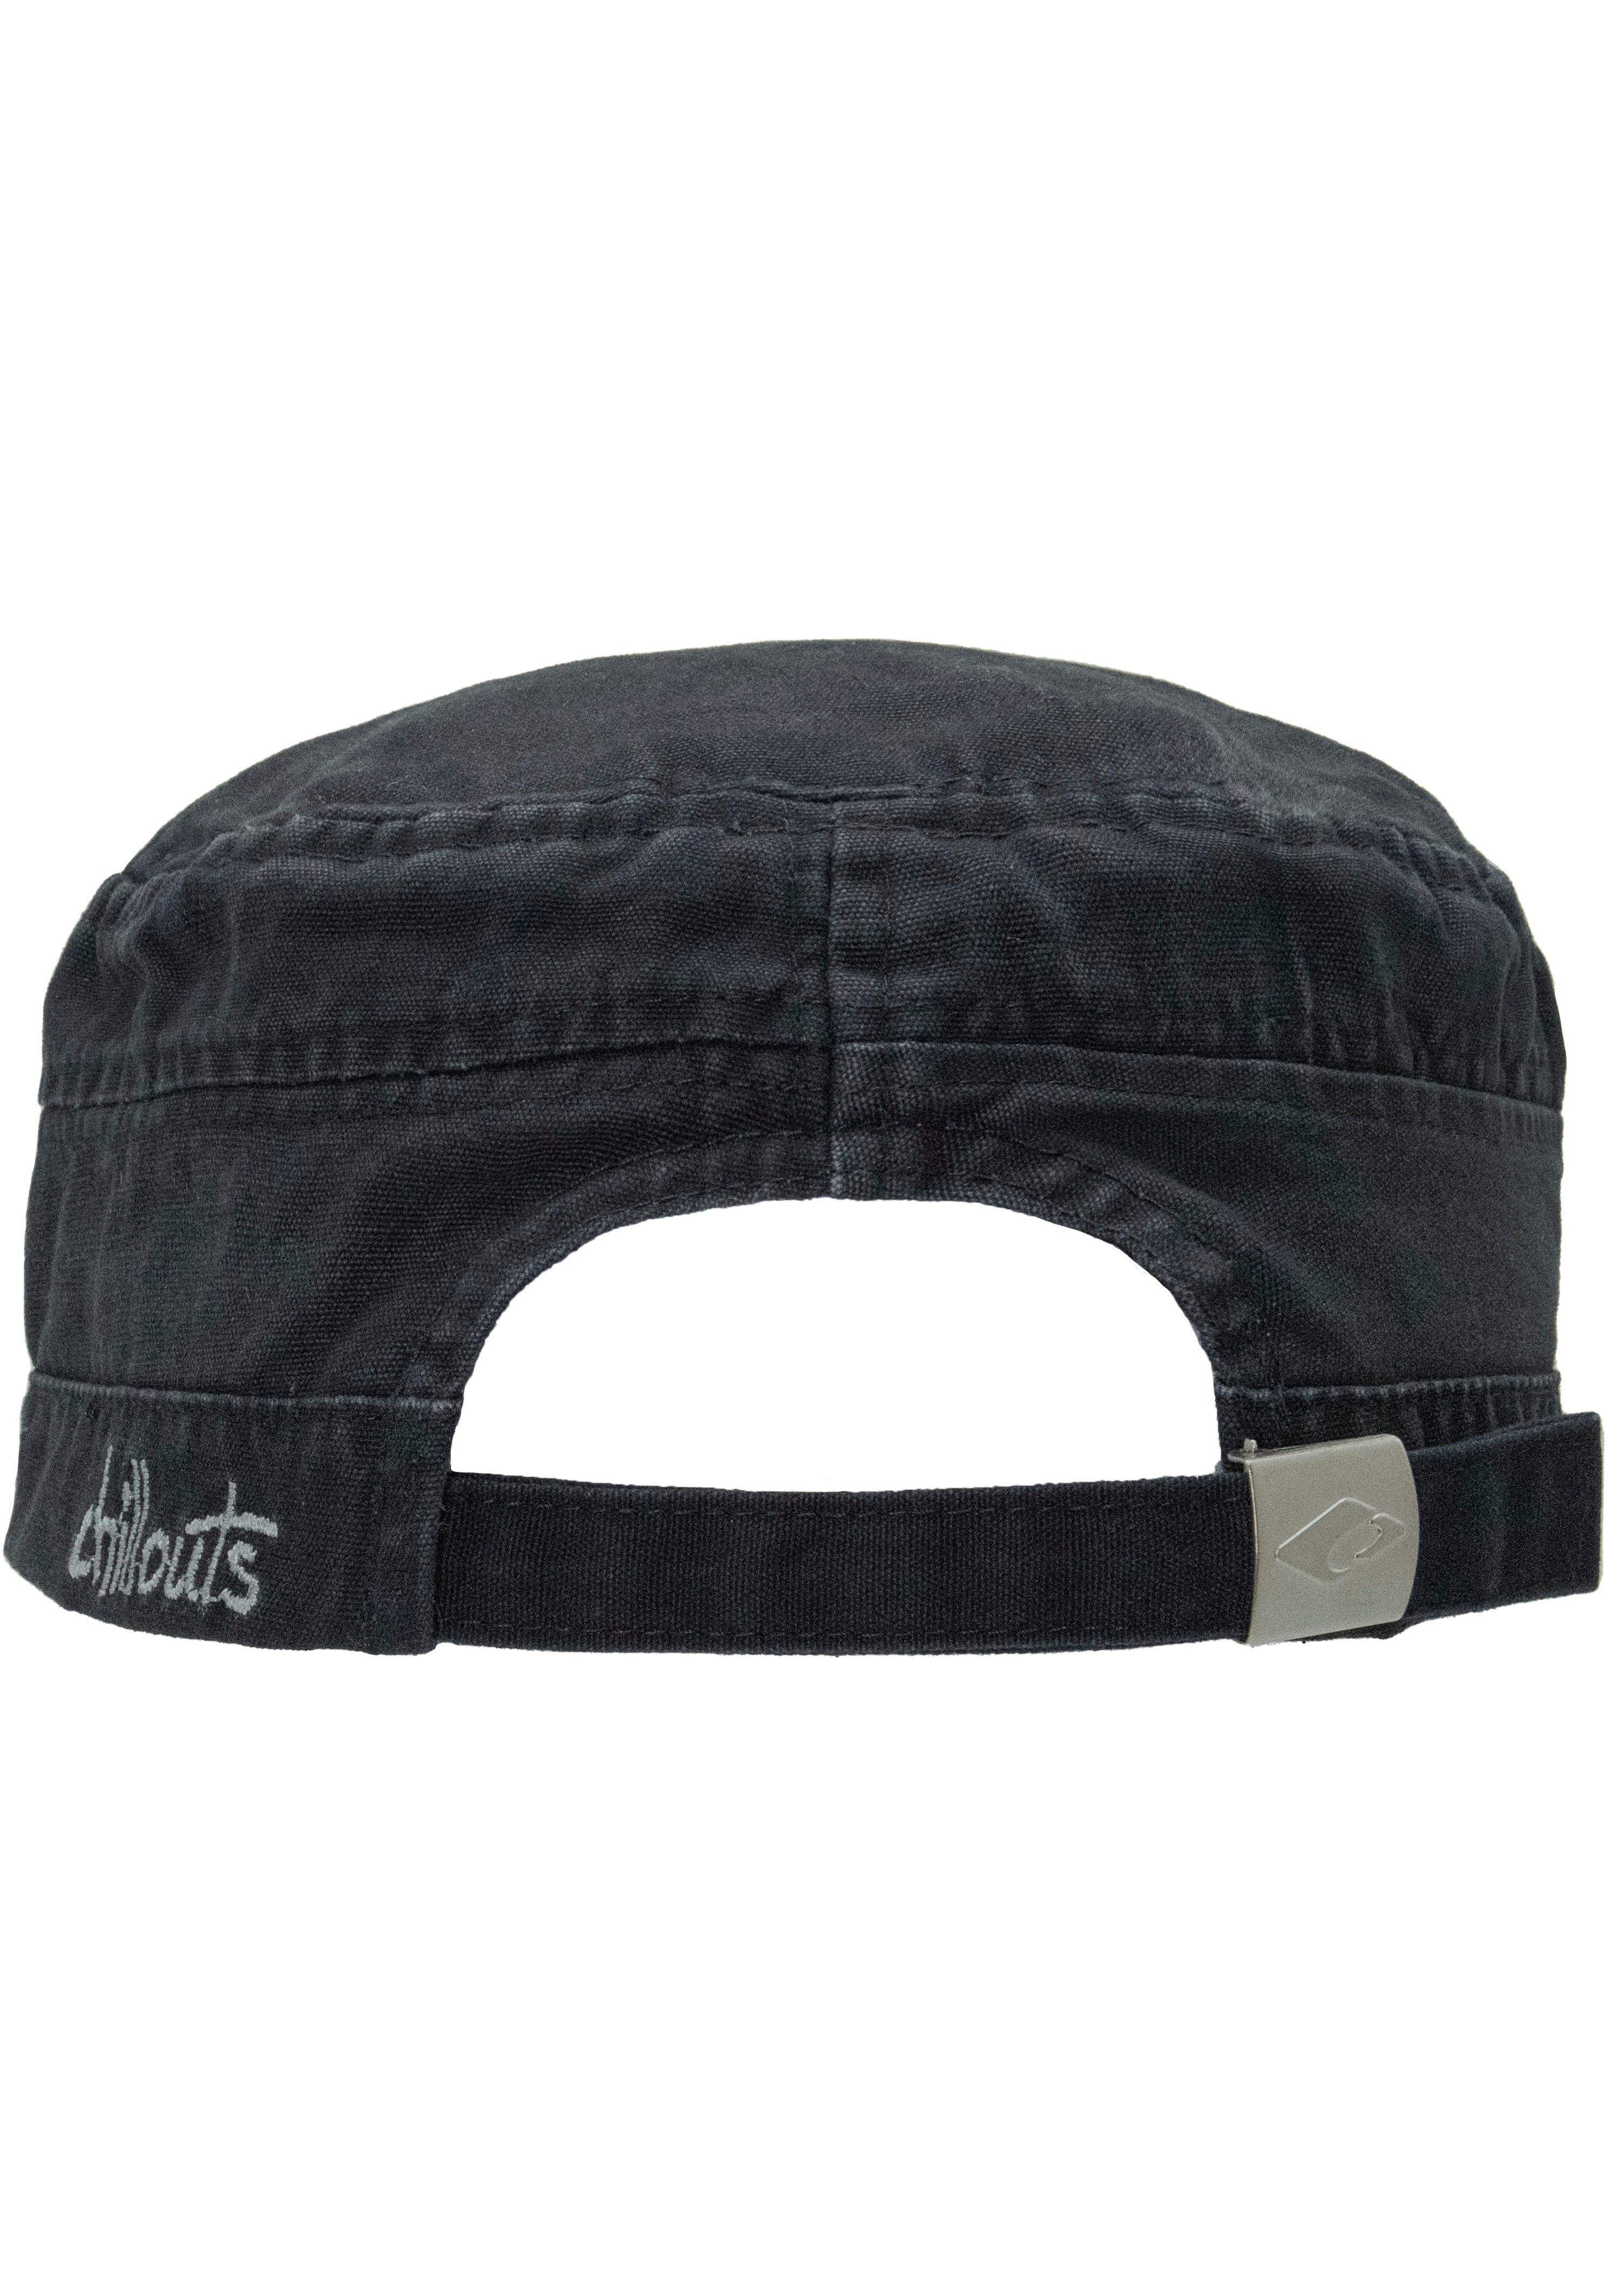 washed Cap Hat chillouts aus Army Baumwolle, Paso reiner El atmungsaktiv, One Size navy